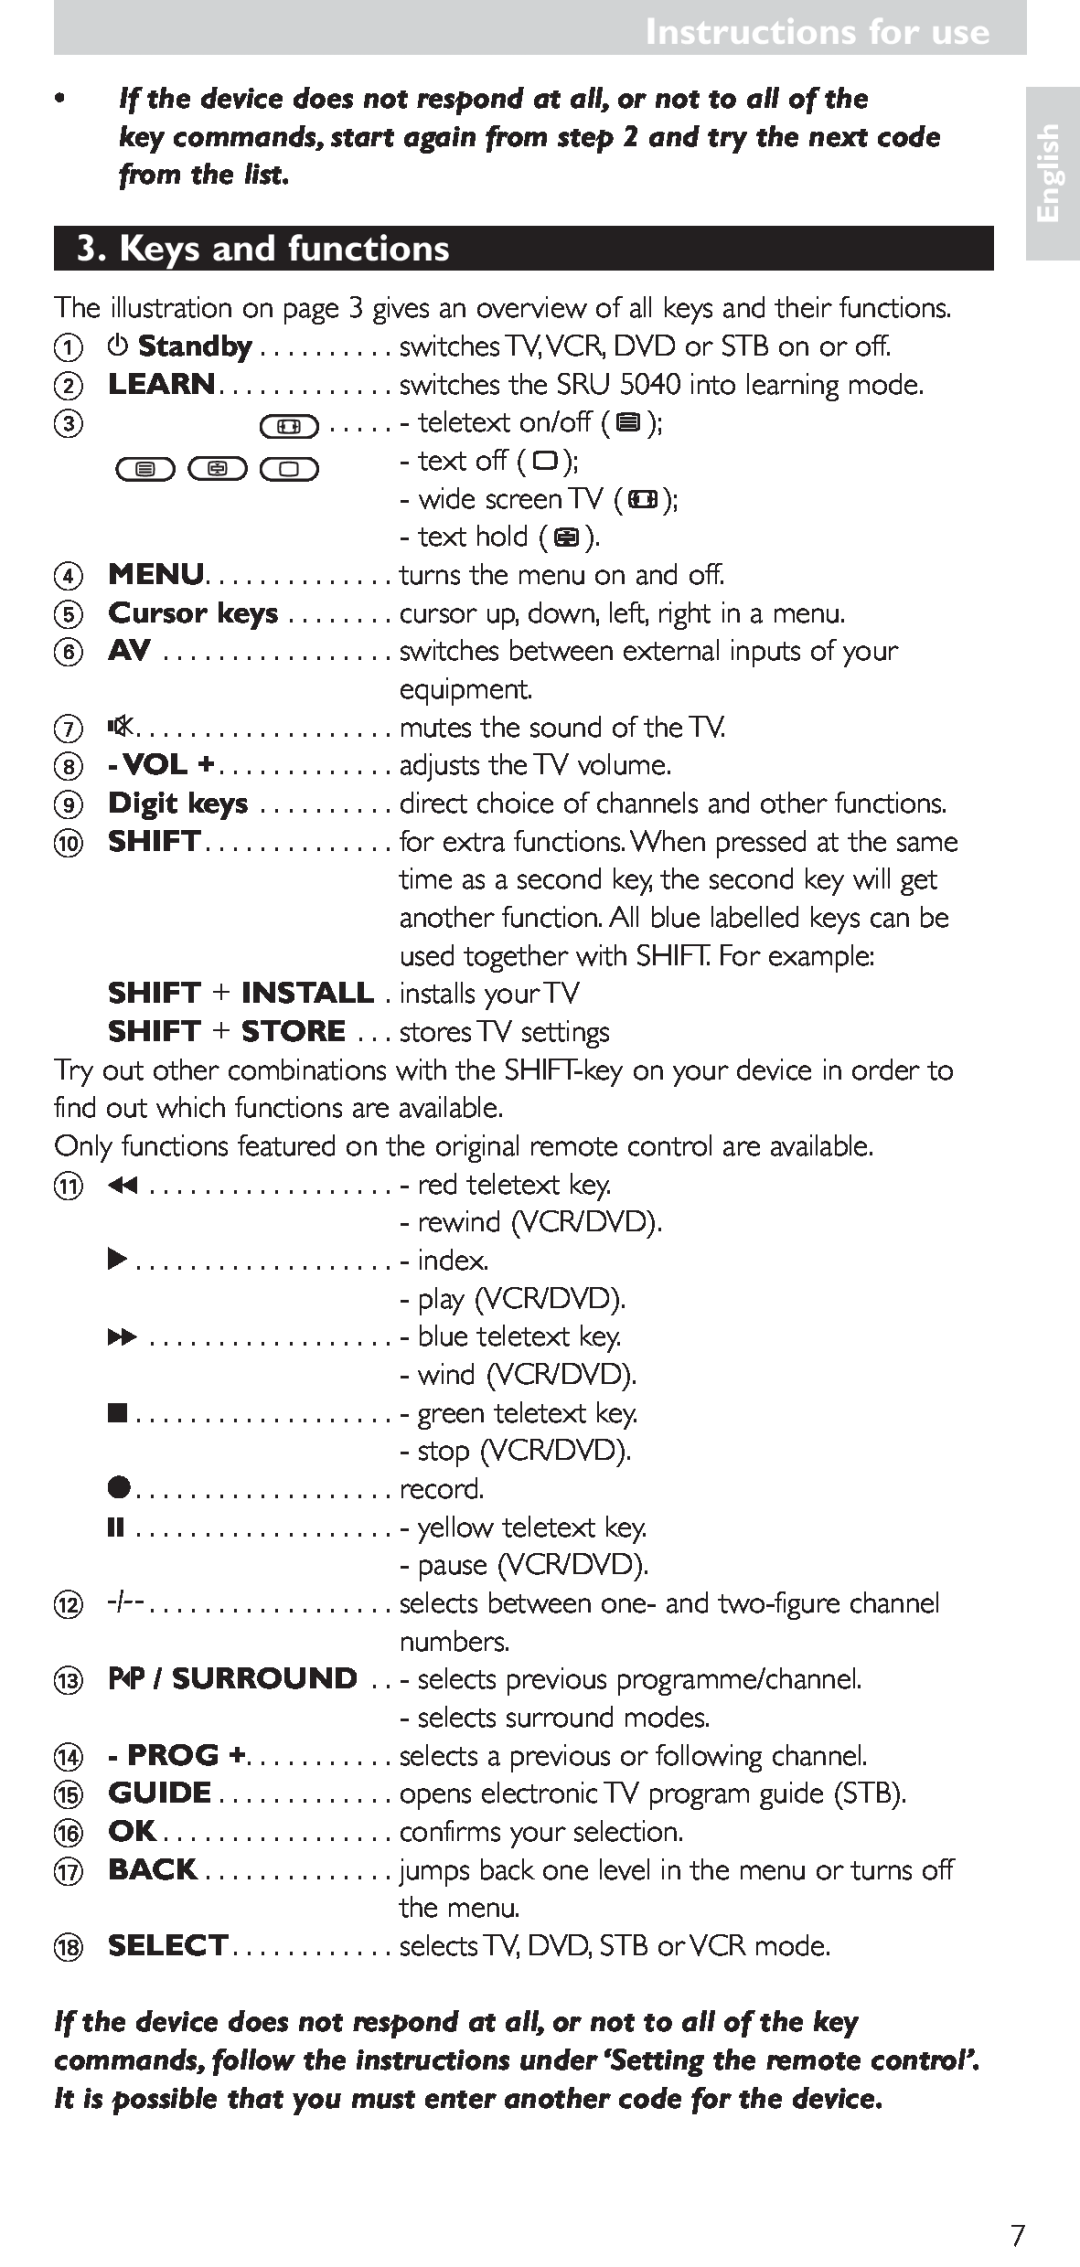 Hitachi SRU 5040/05 manual Keys and functions, If the device does not respond at all, or not to all of the, Shift + Store 